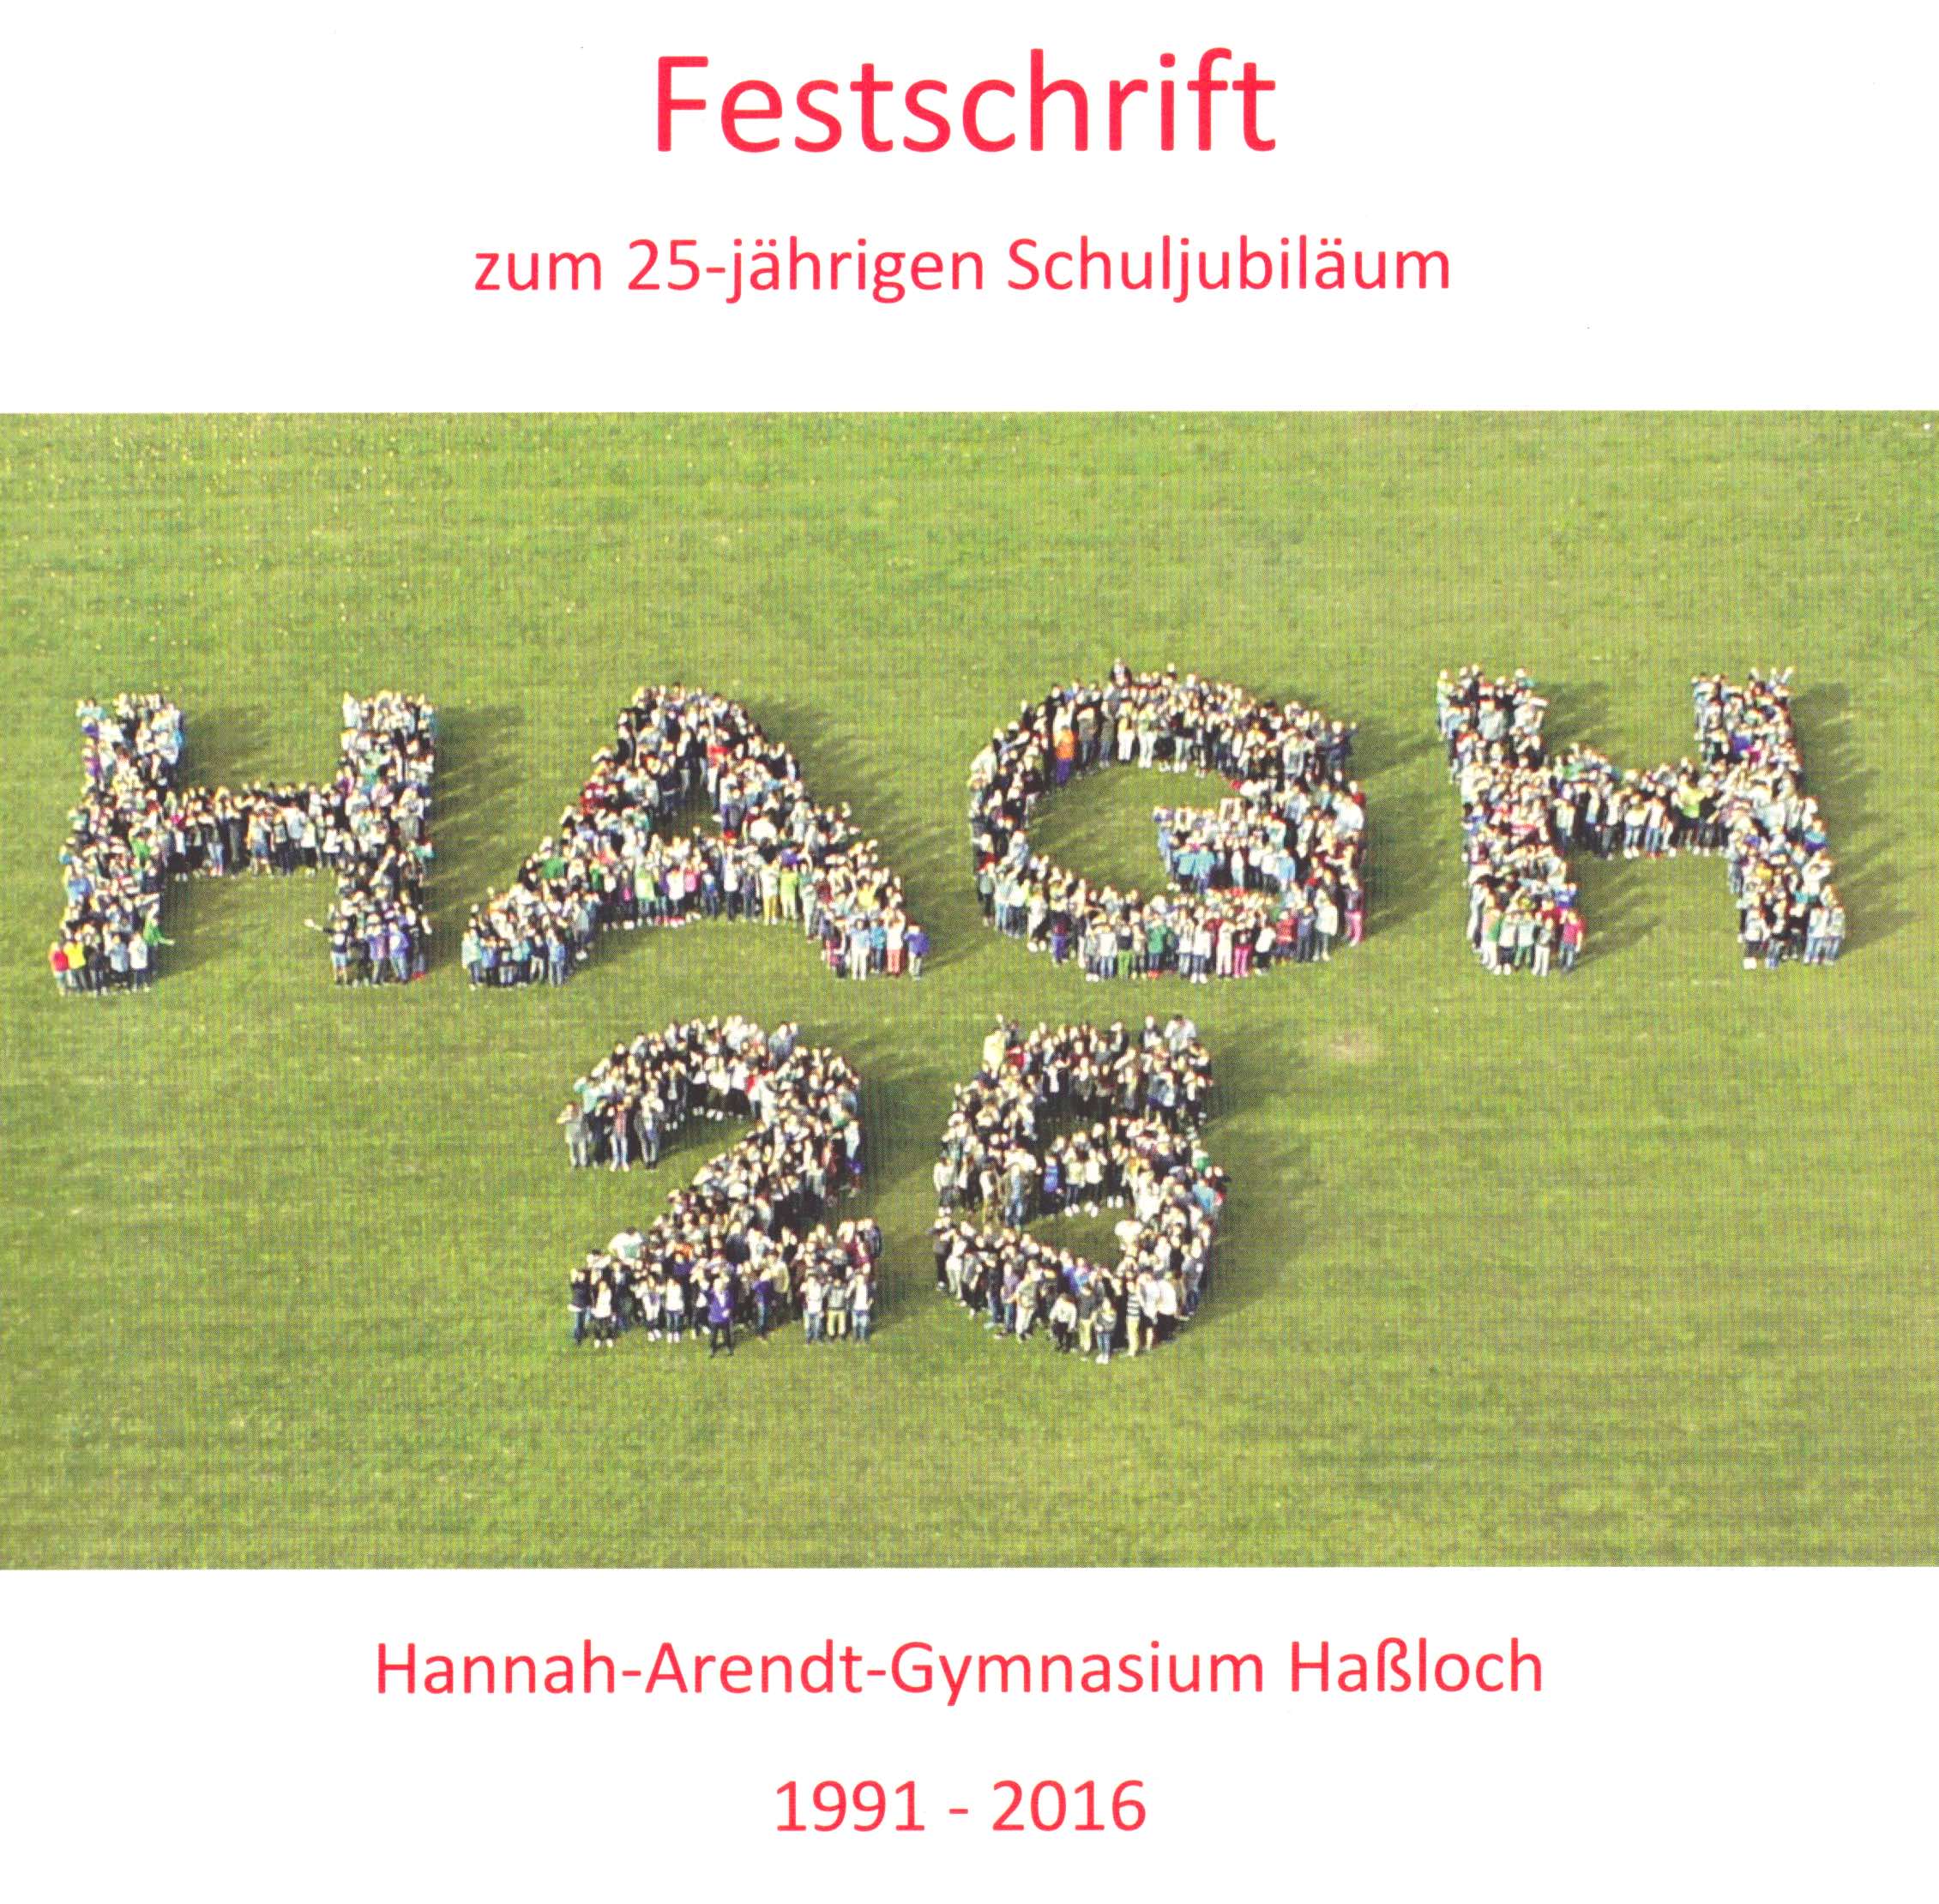 Festschriftcover